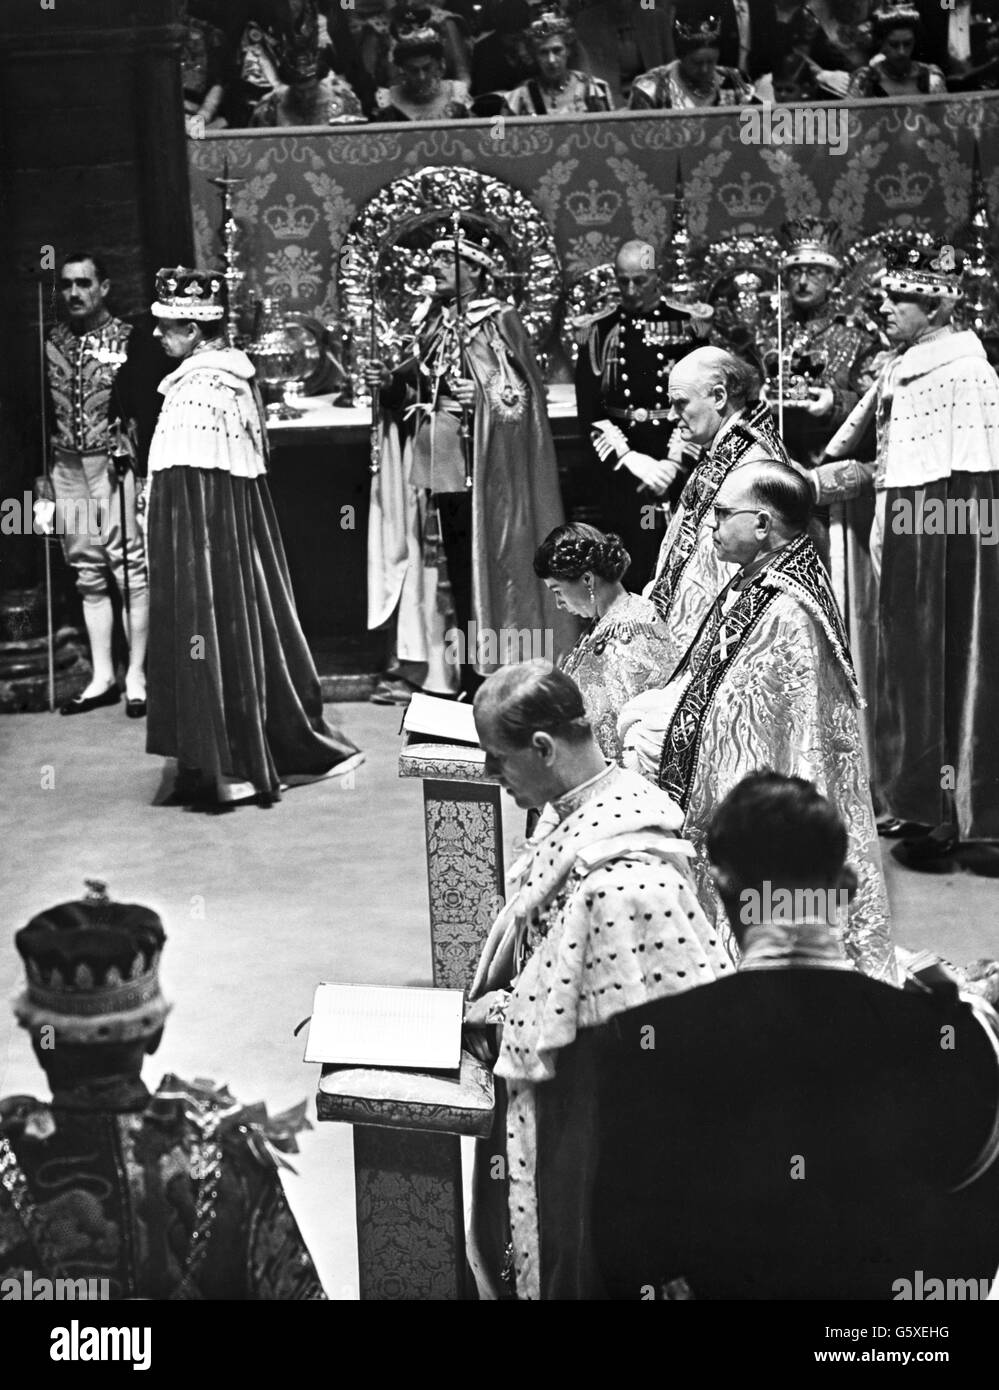 The Queen and the Duke of Edinburgh kneeling side by side in front of the Altar for the Communion in Westminster Abbey after the Crowning and Homage Ceremonies. Stock Photo